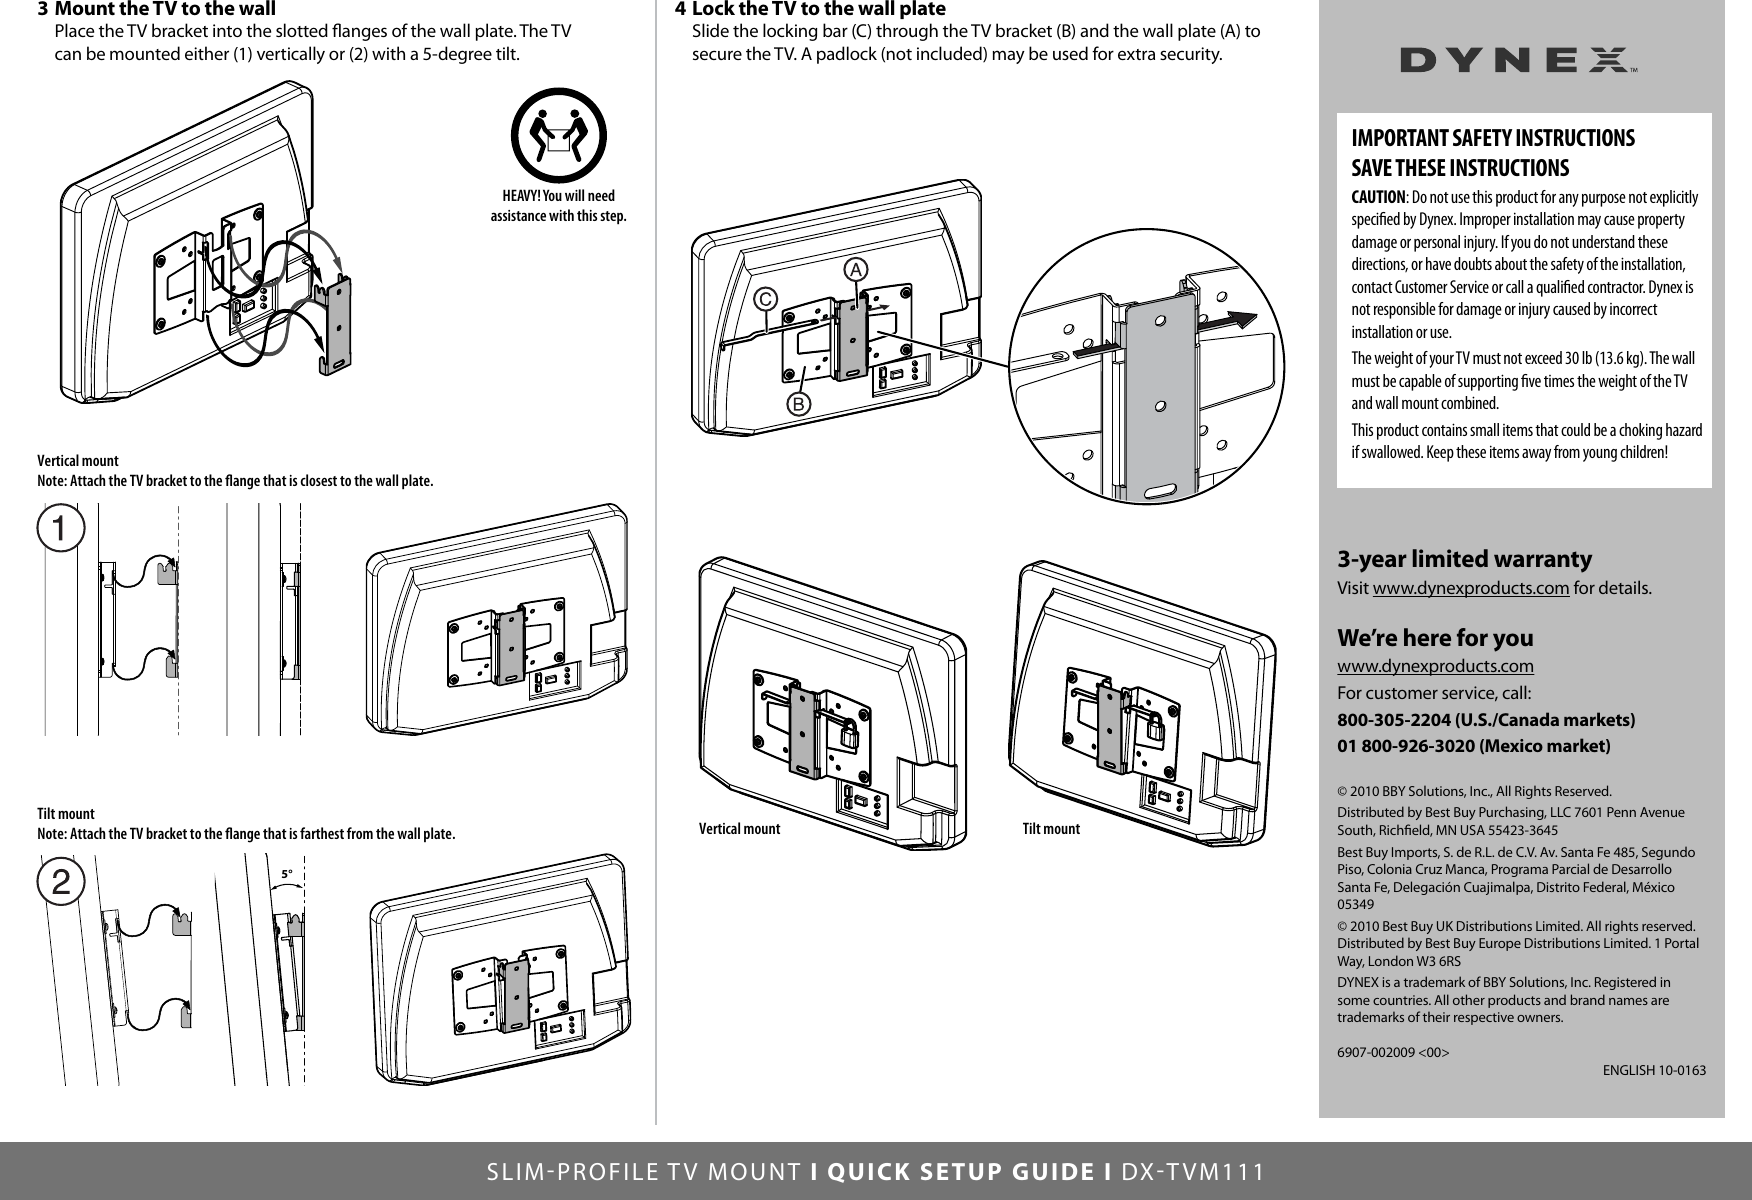 Page 2 of 2 - Dynex Dynex-Fixed-Tv-Wall-Mount-For-Most-13-26-Flat-Panel-Tvs-Black-Quick-Setup-Guide- DX-TVM111_10-0163_QSG_V1_EN  Dynex-fixed-tv-wall-mount-for-most-13-26-flat-panel-tvs-black-quick-setup-guide